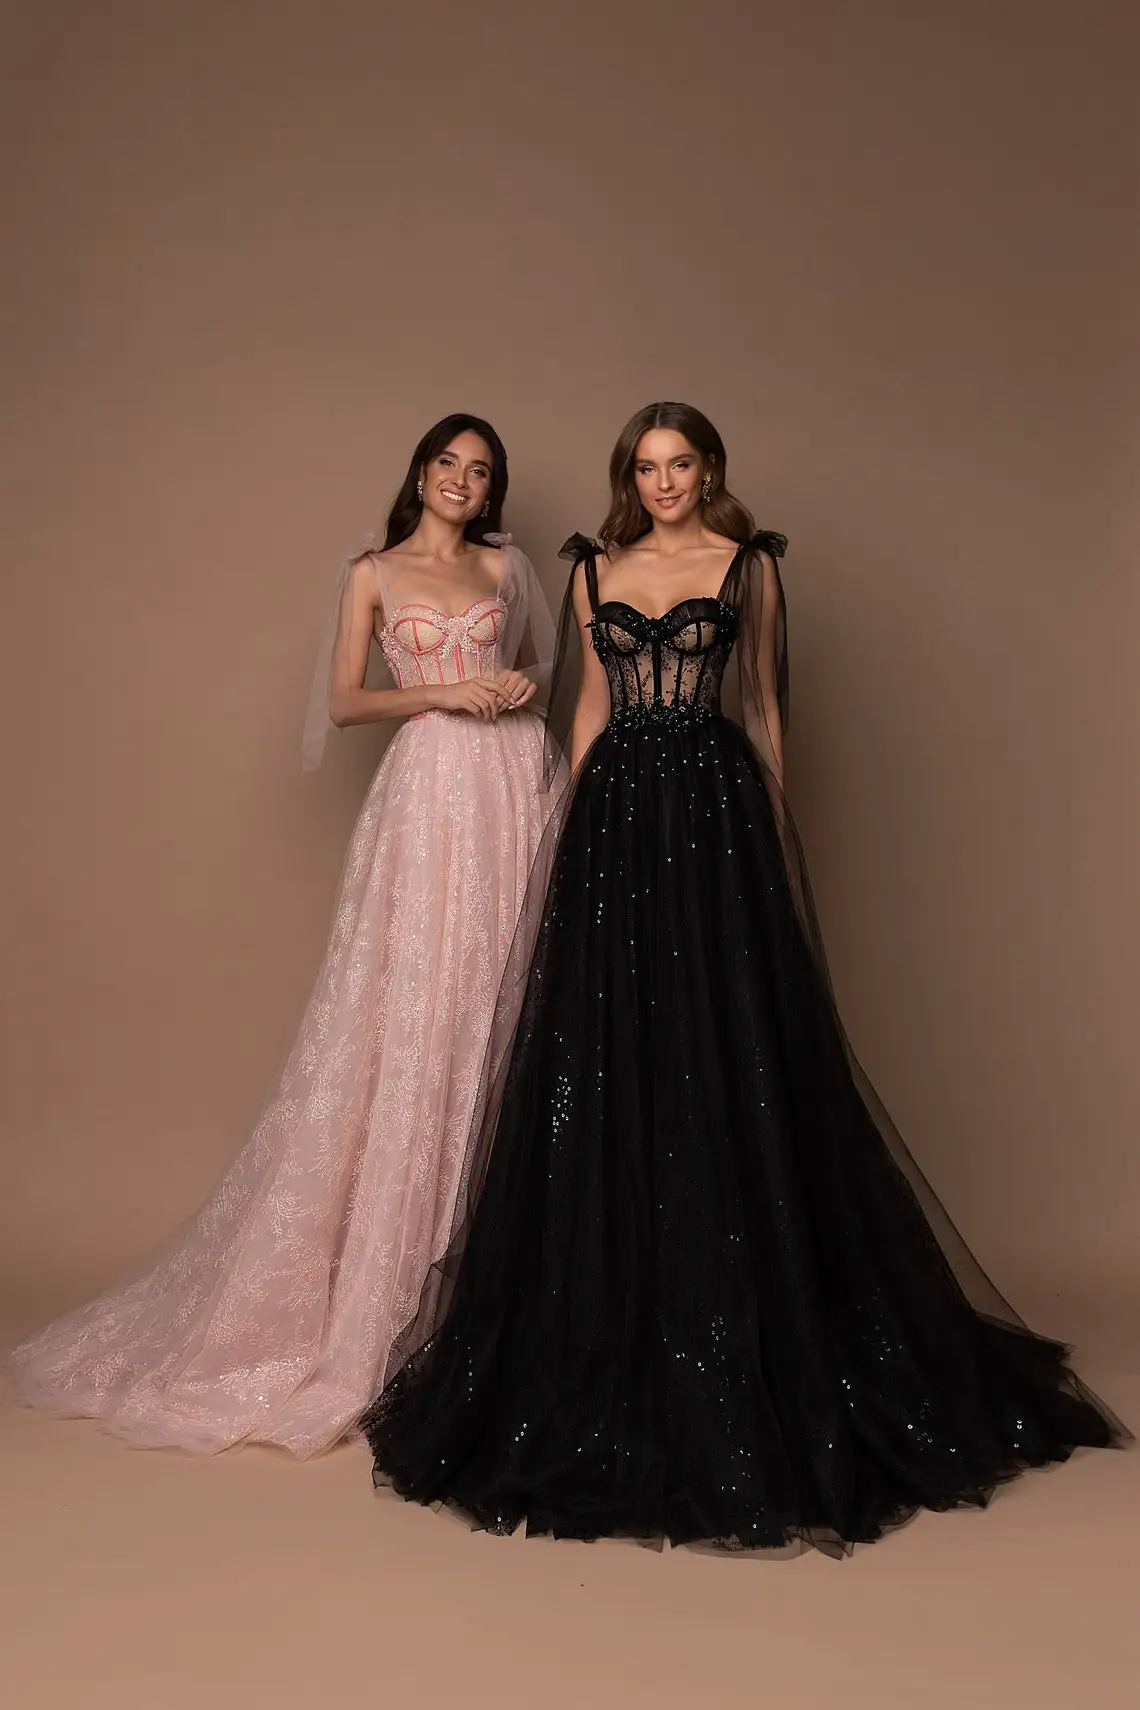 A-Line Fashion Tulle Evening Dress with Cups Black Pink Red See Through Sequined Prom Dress Strappy Shoulder Formal Party Dress